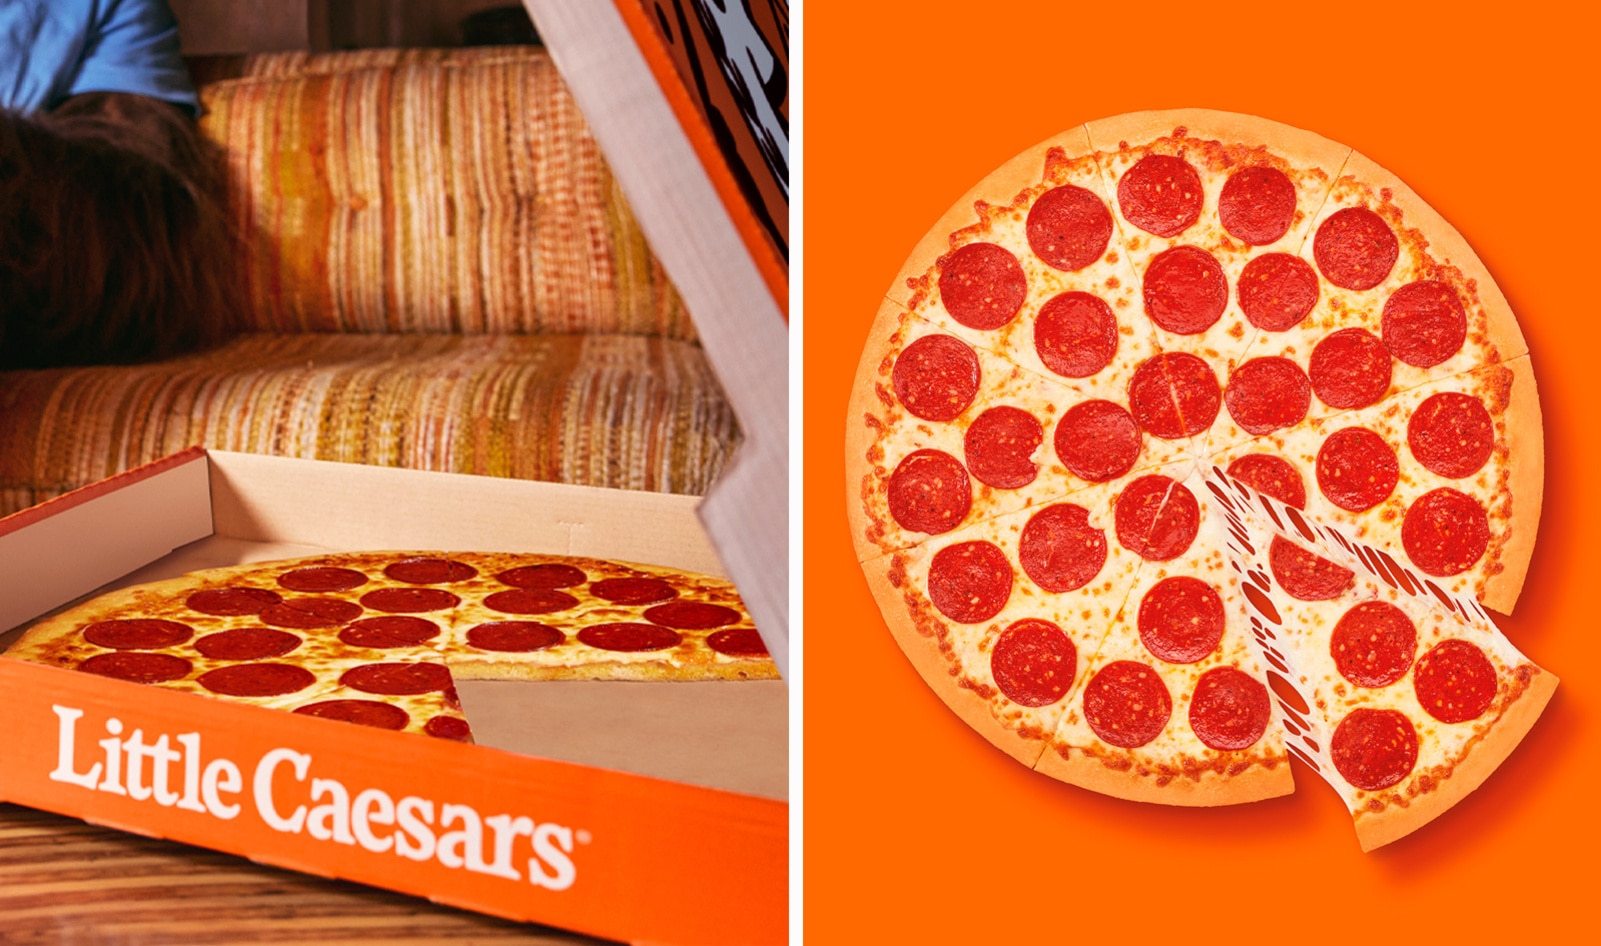 Vegan Pepperoni Comes to Little Caesars Pizza In Major US First